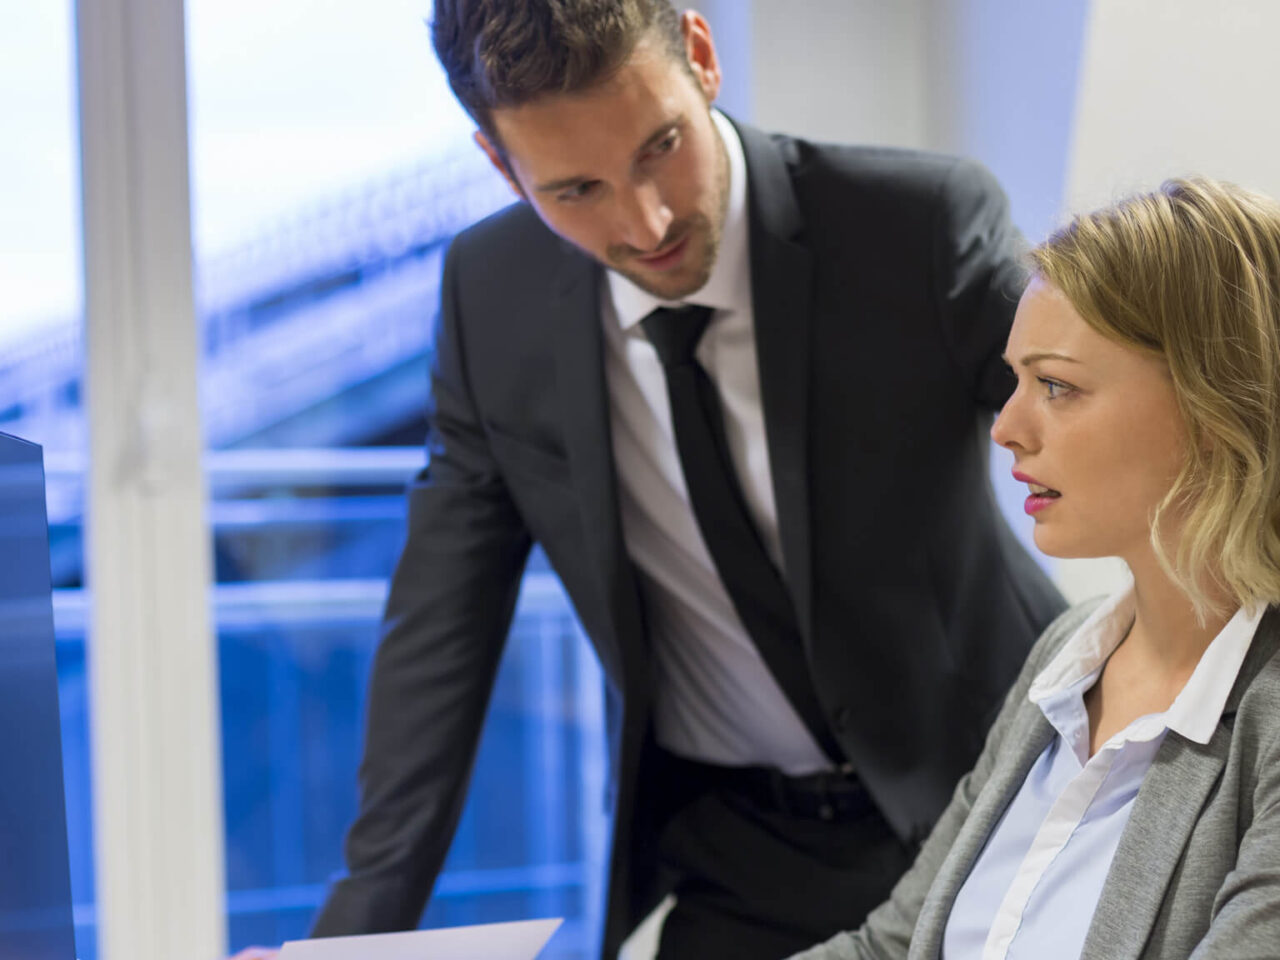 Businessman harassing a clearly uncomfortable female colleague